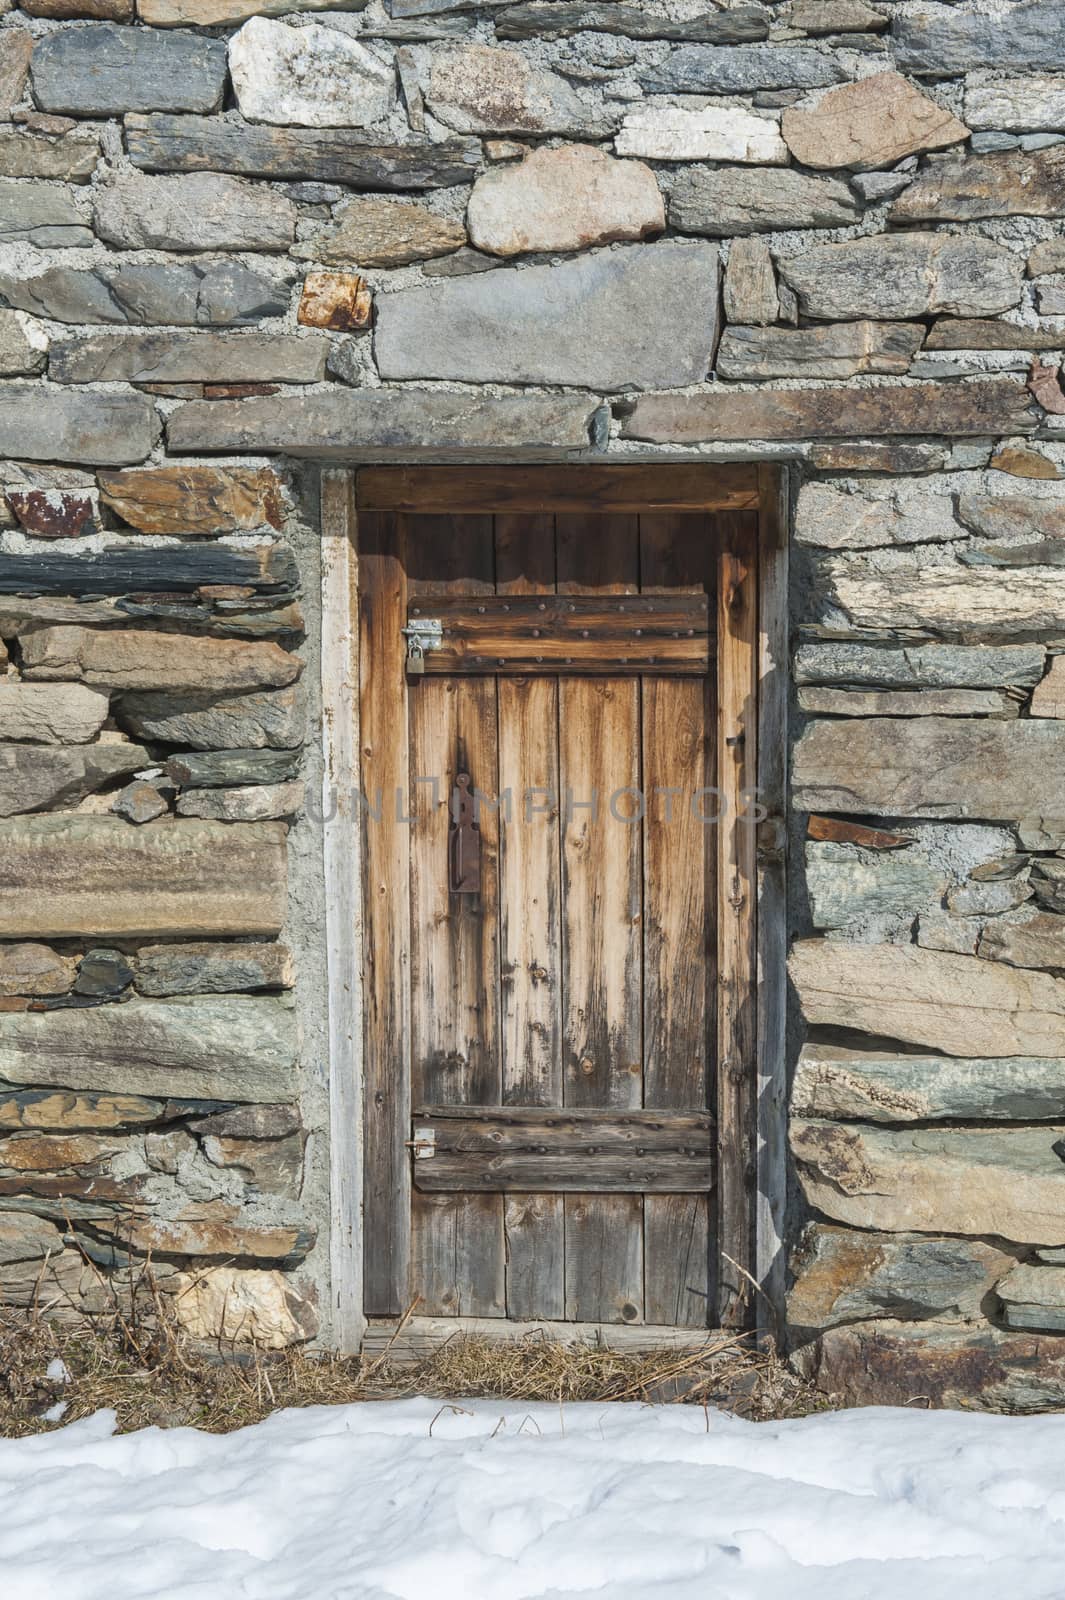 Wooden doorway of remote stone mountain hut on an alpine slope covered in snow